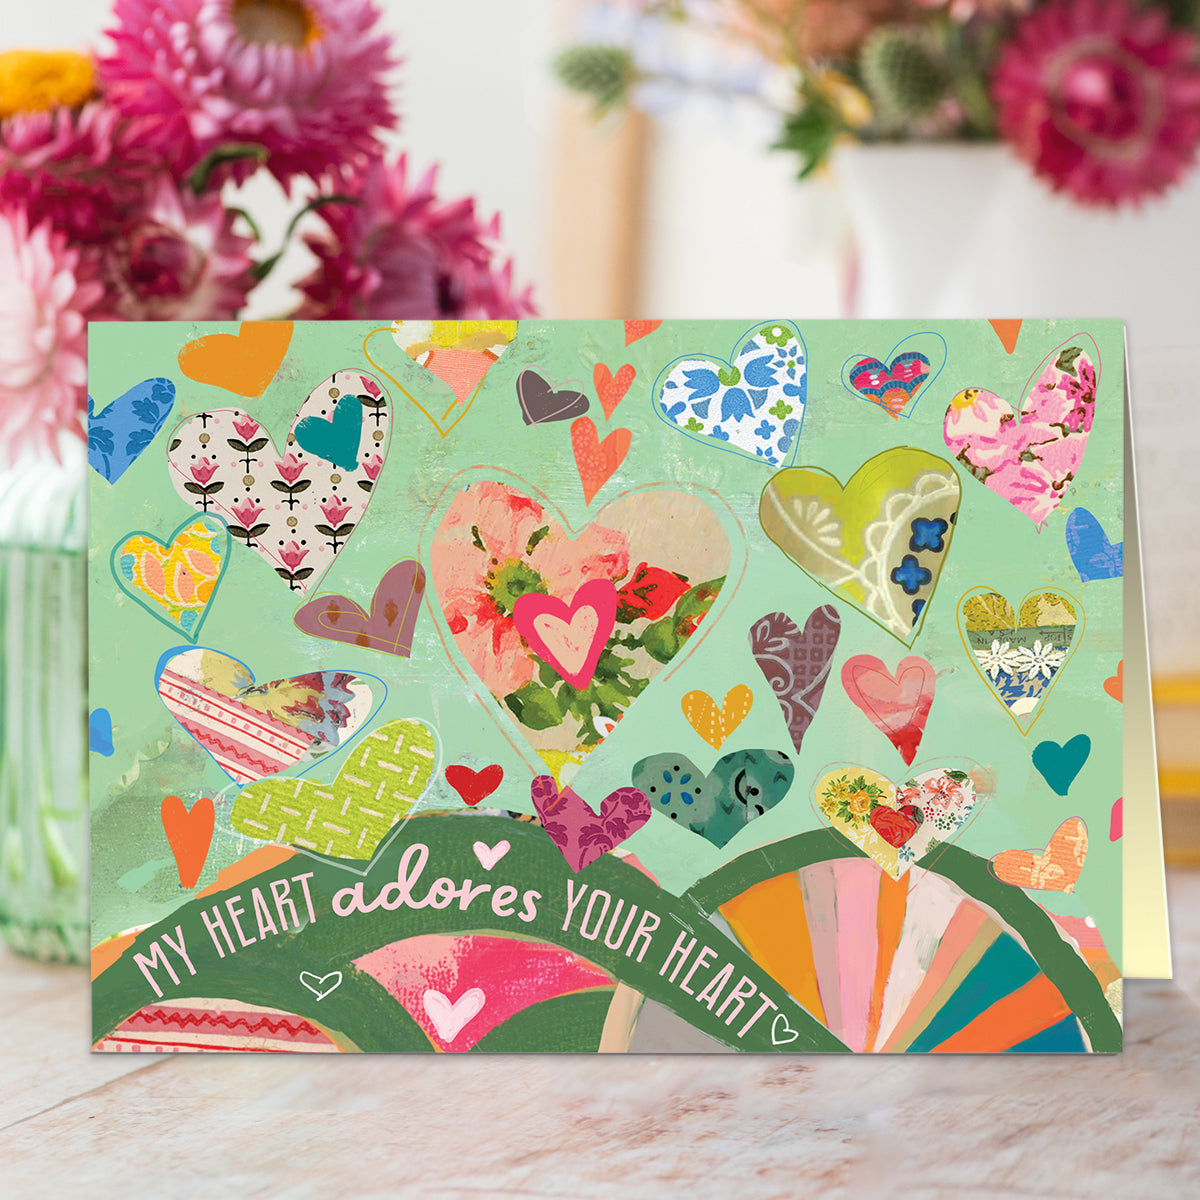 My Heart Adores Your Heart 4x6 Card